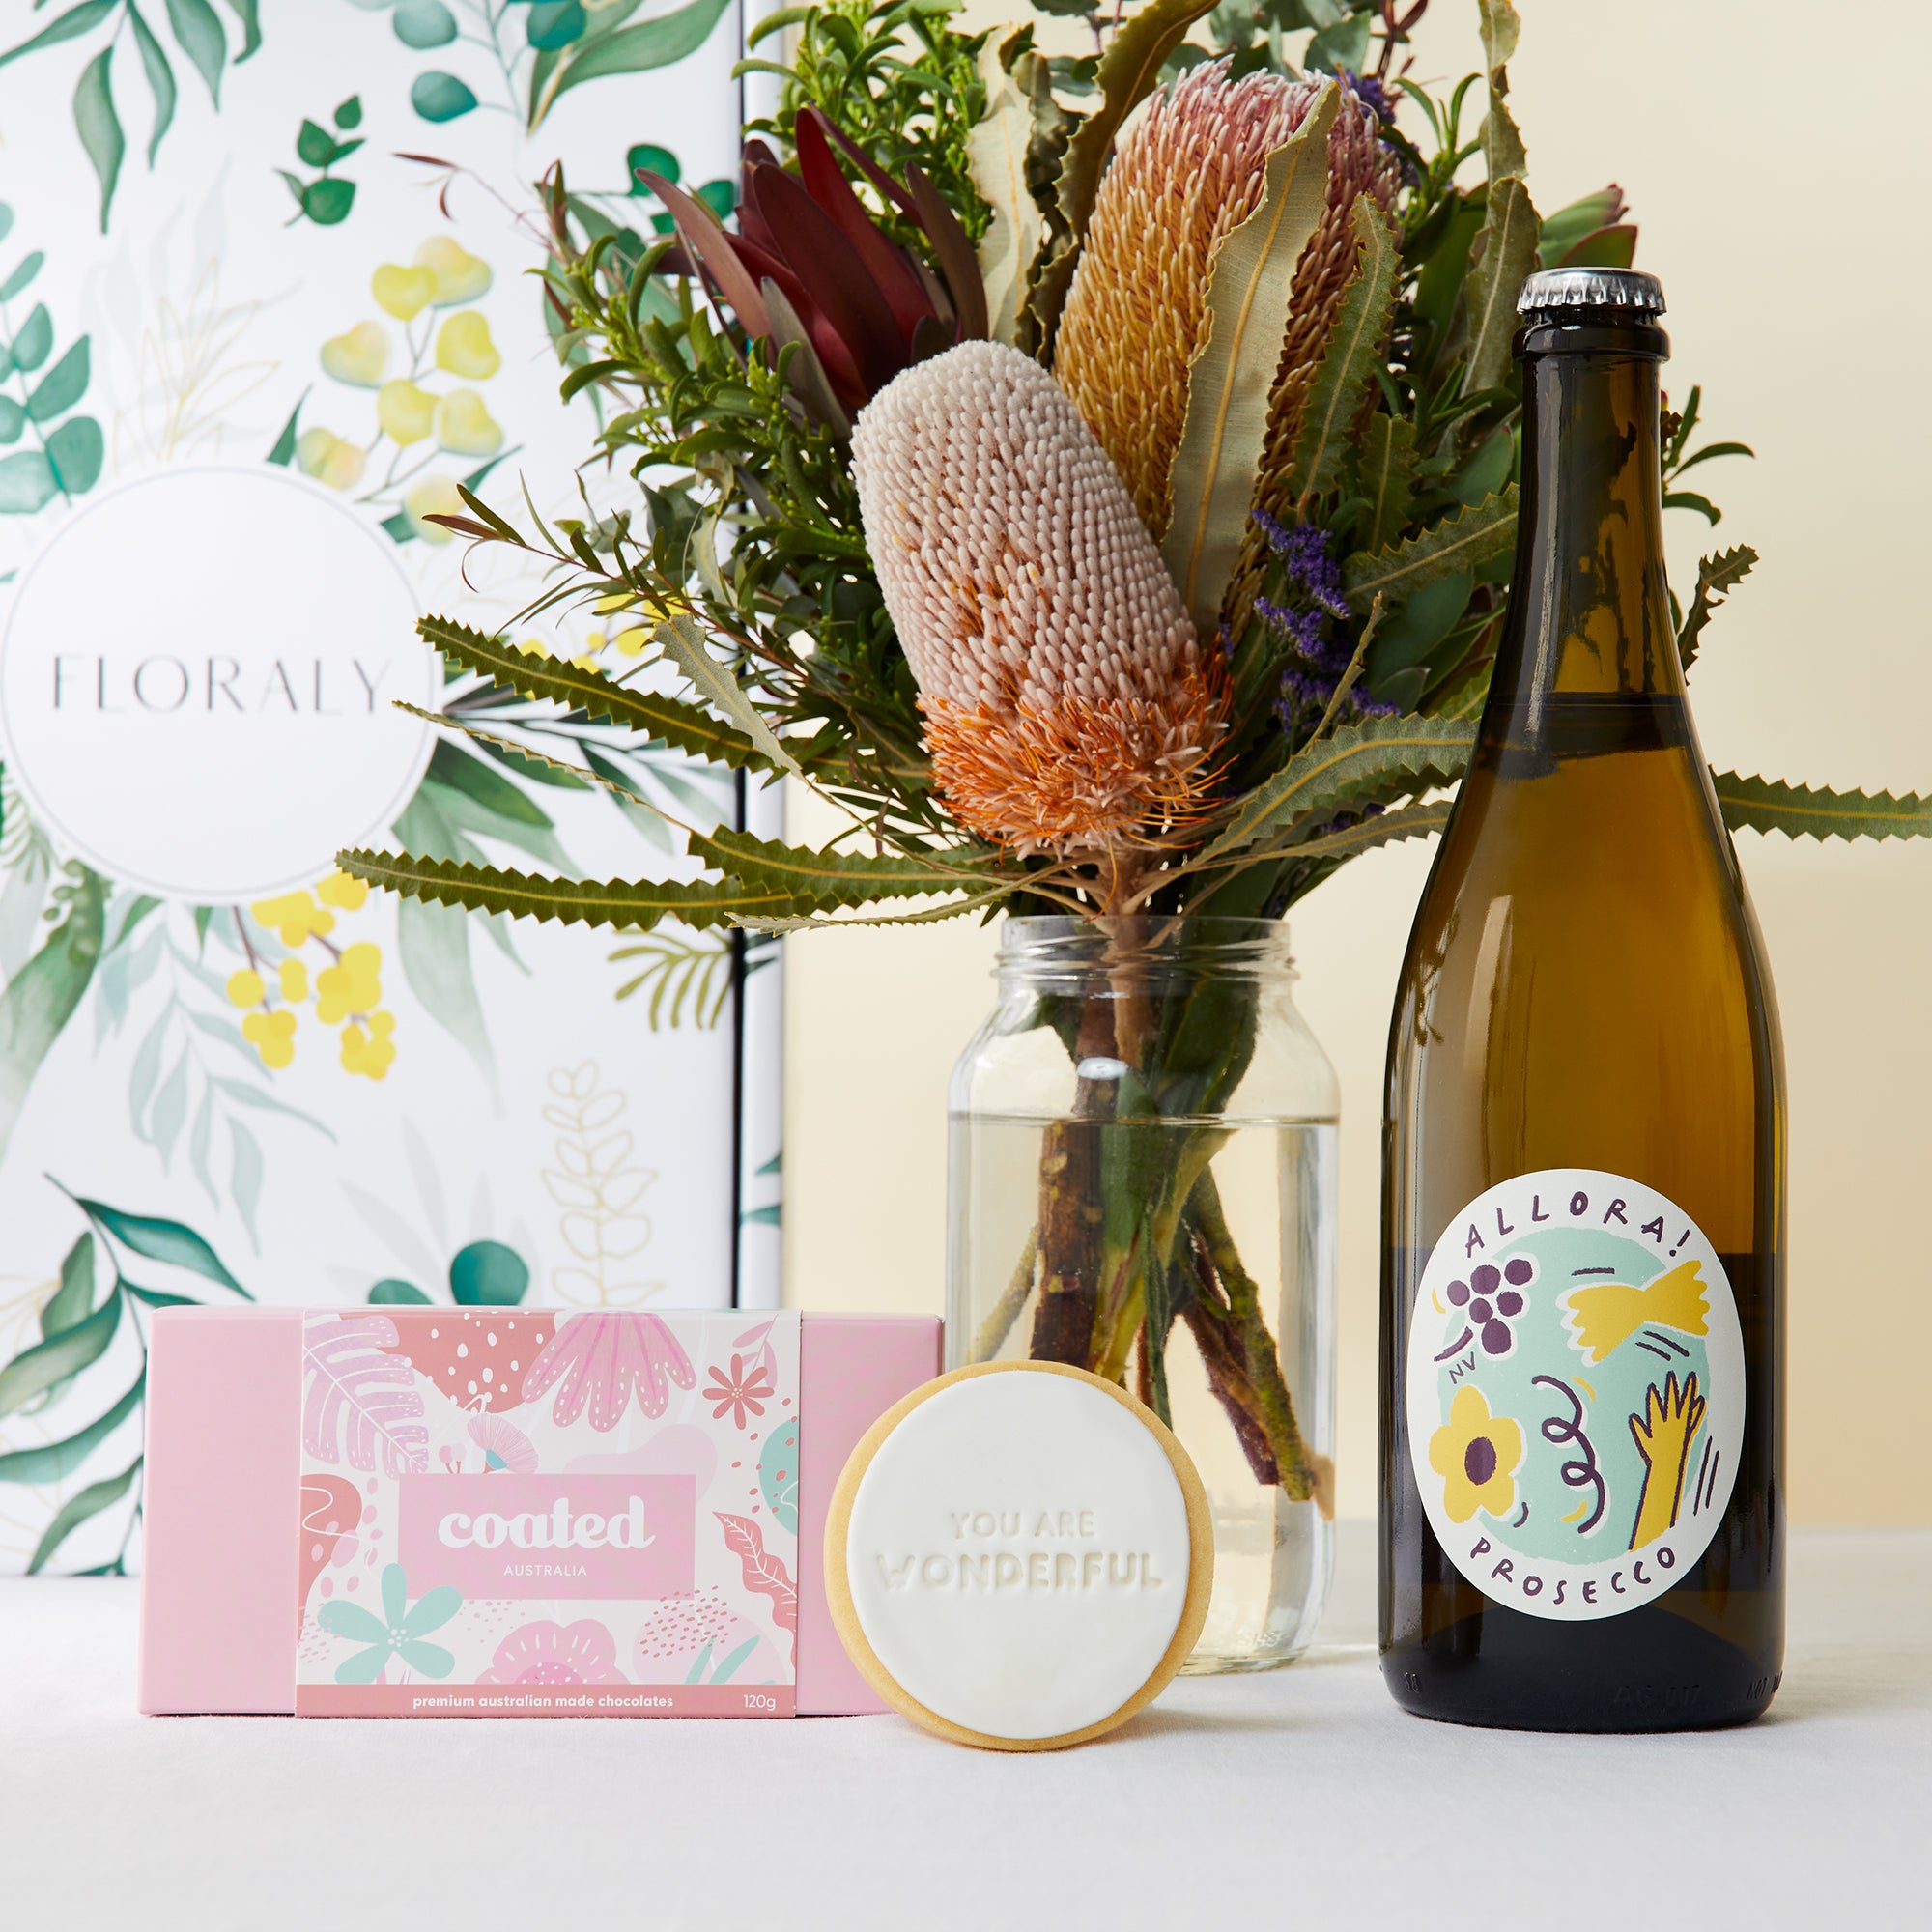 The Natives & Prosecco Mother's Day Bundle